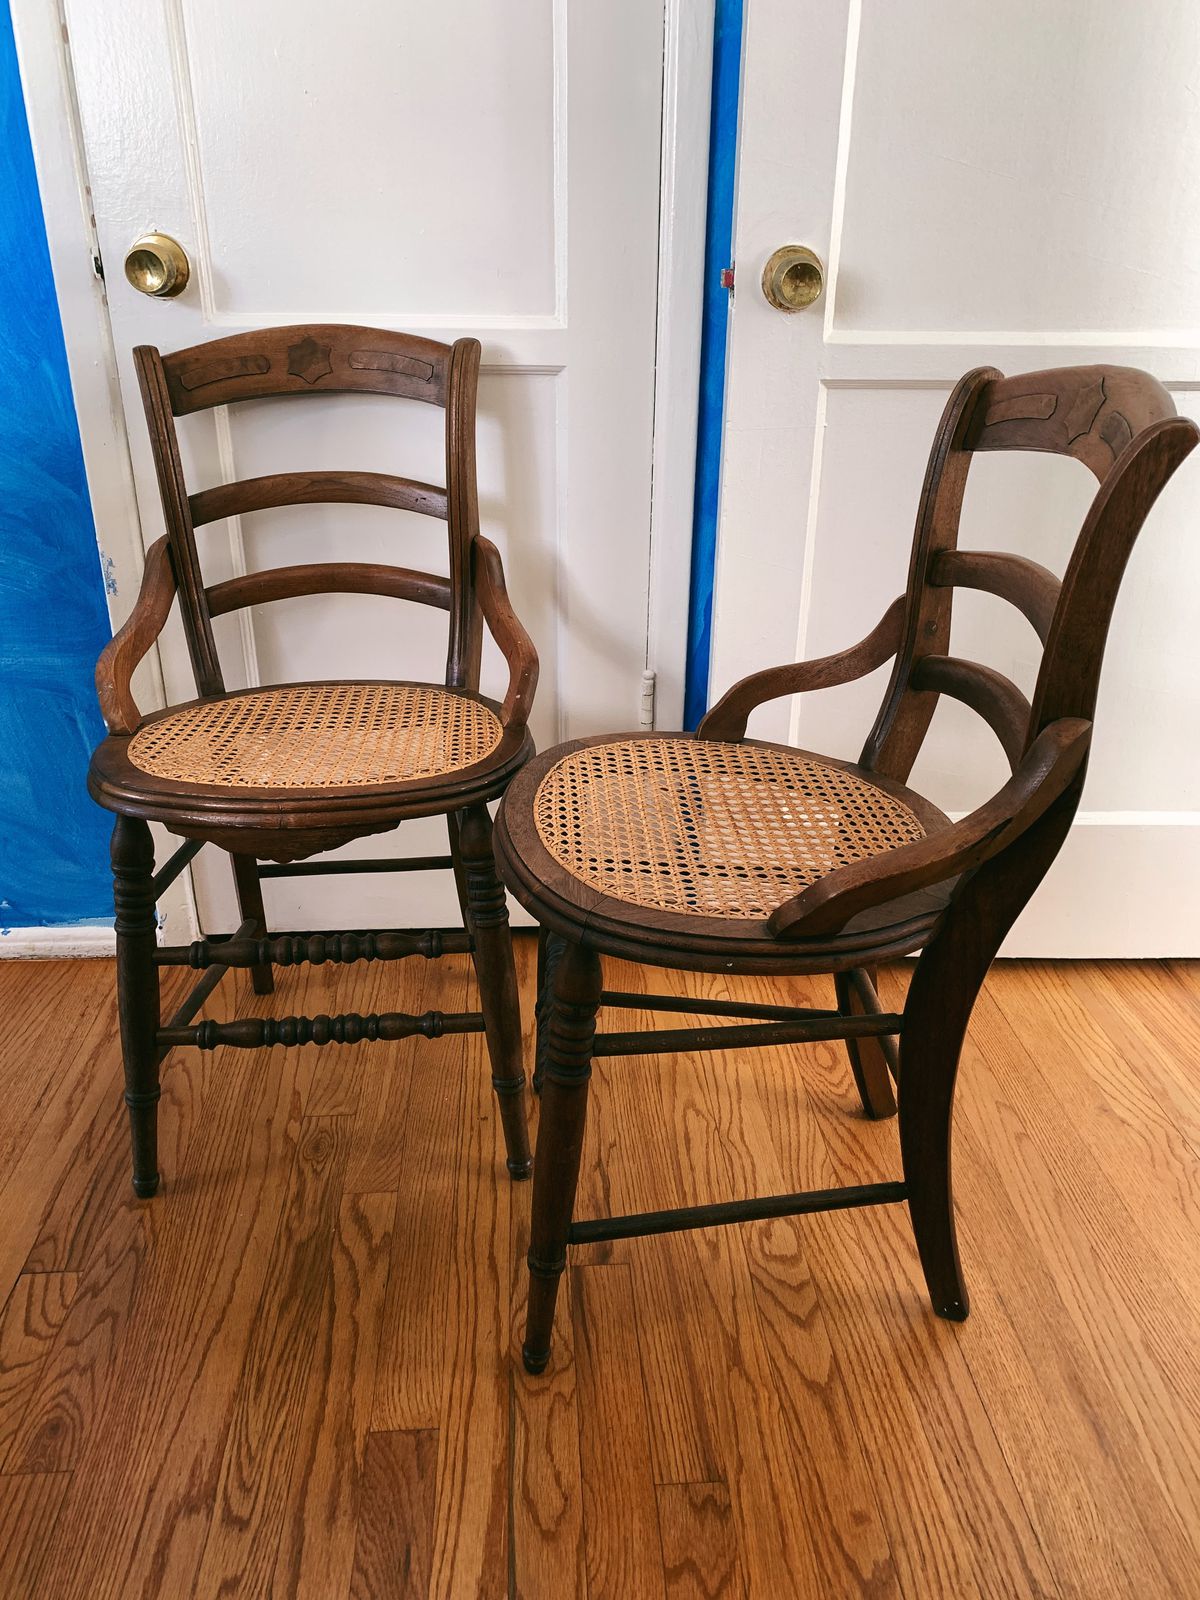 Two wooden chairs with woven bottoms are placed next to each other in a room that has light blue walls, two white doors, and wooden floors.